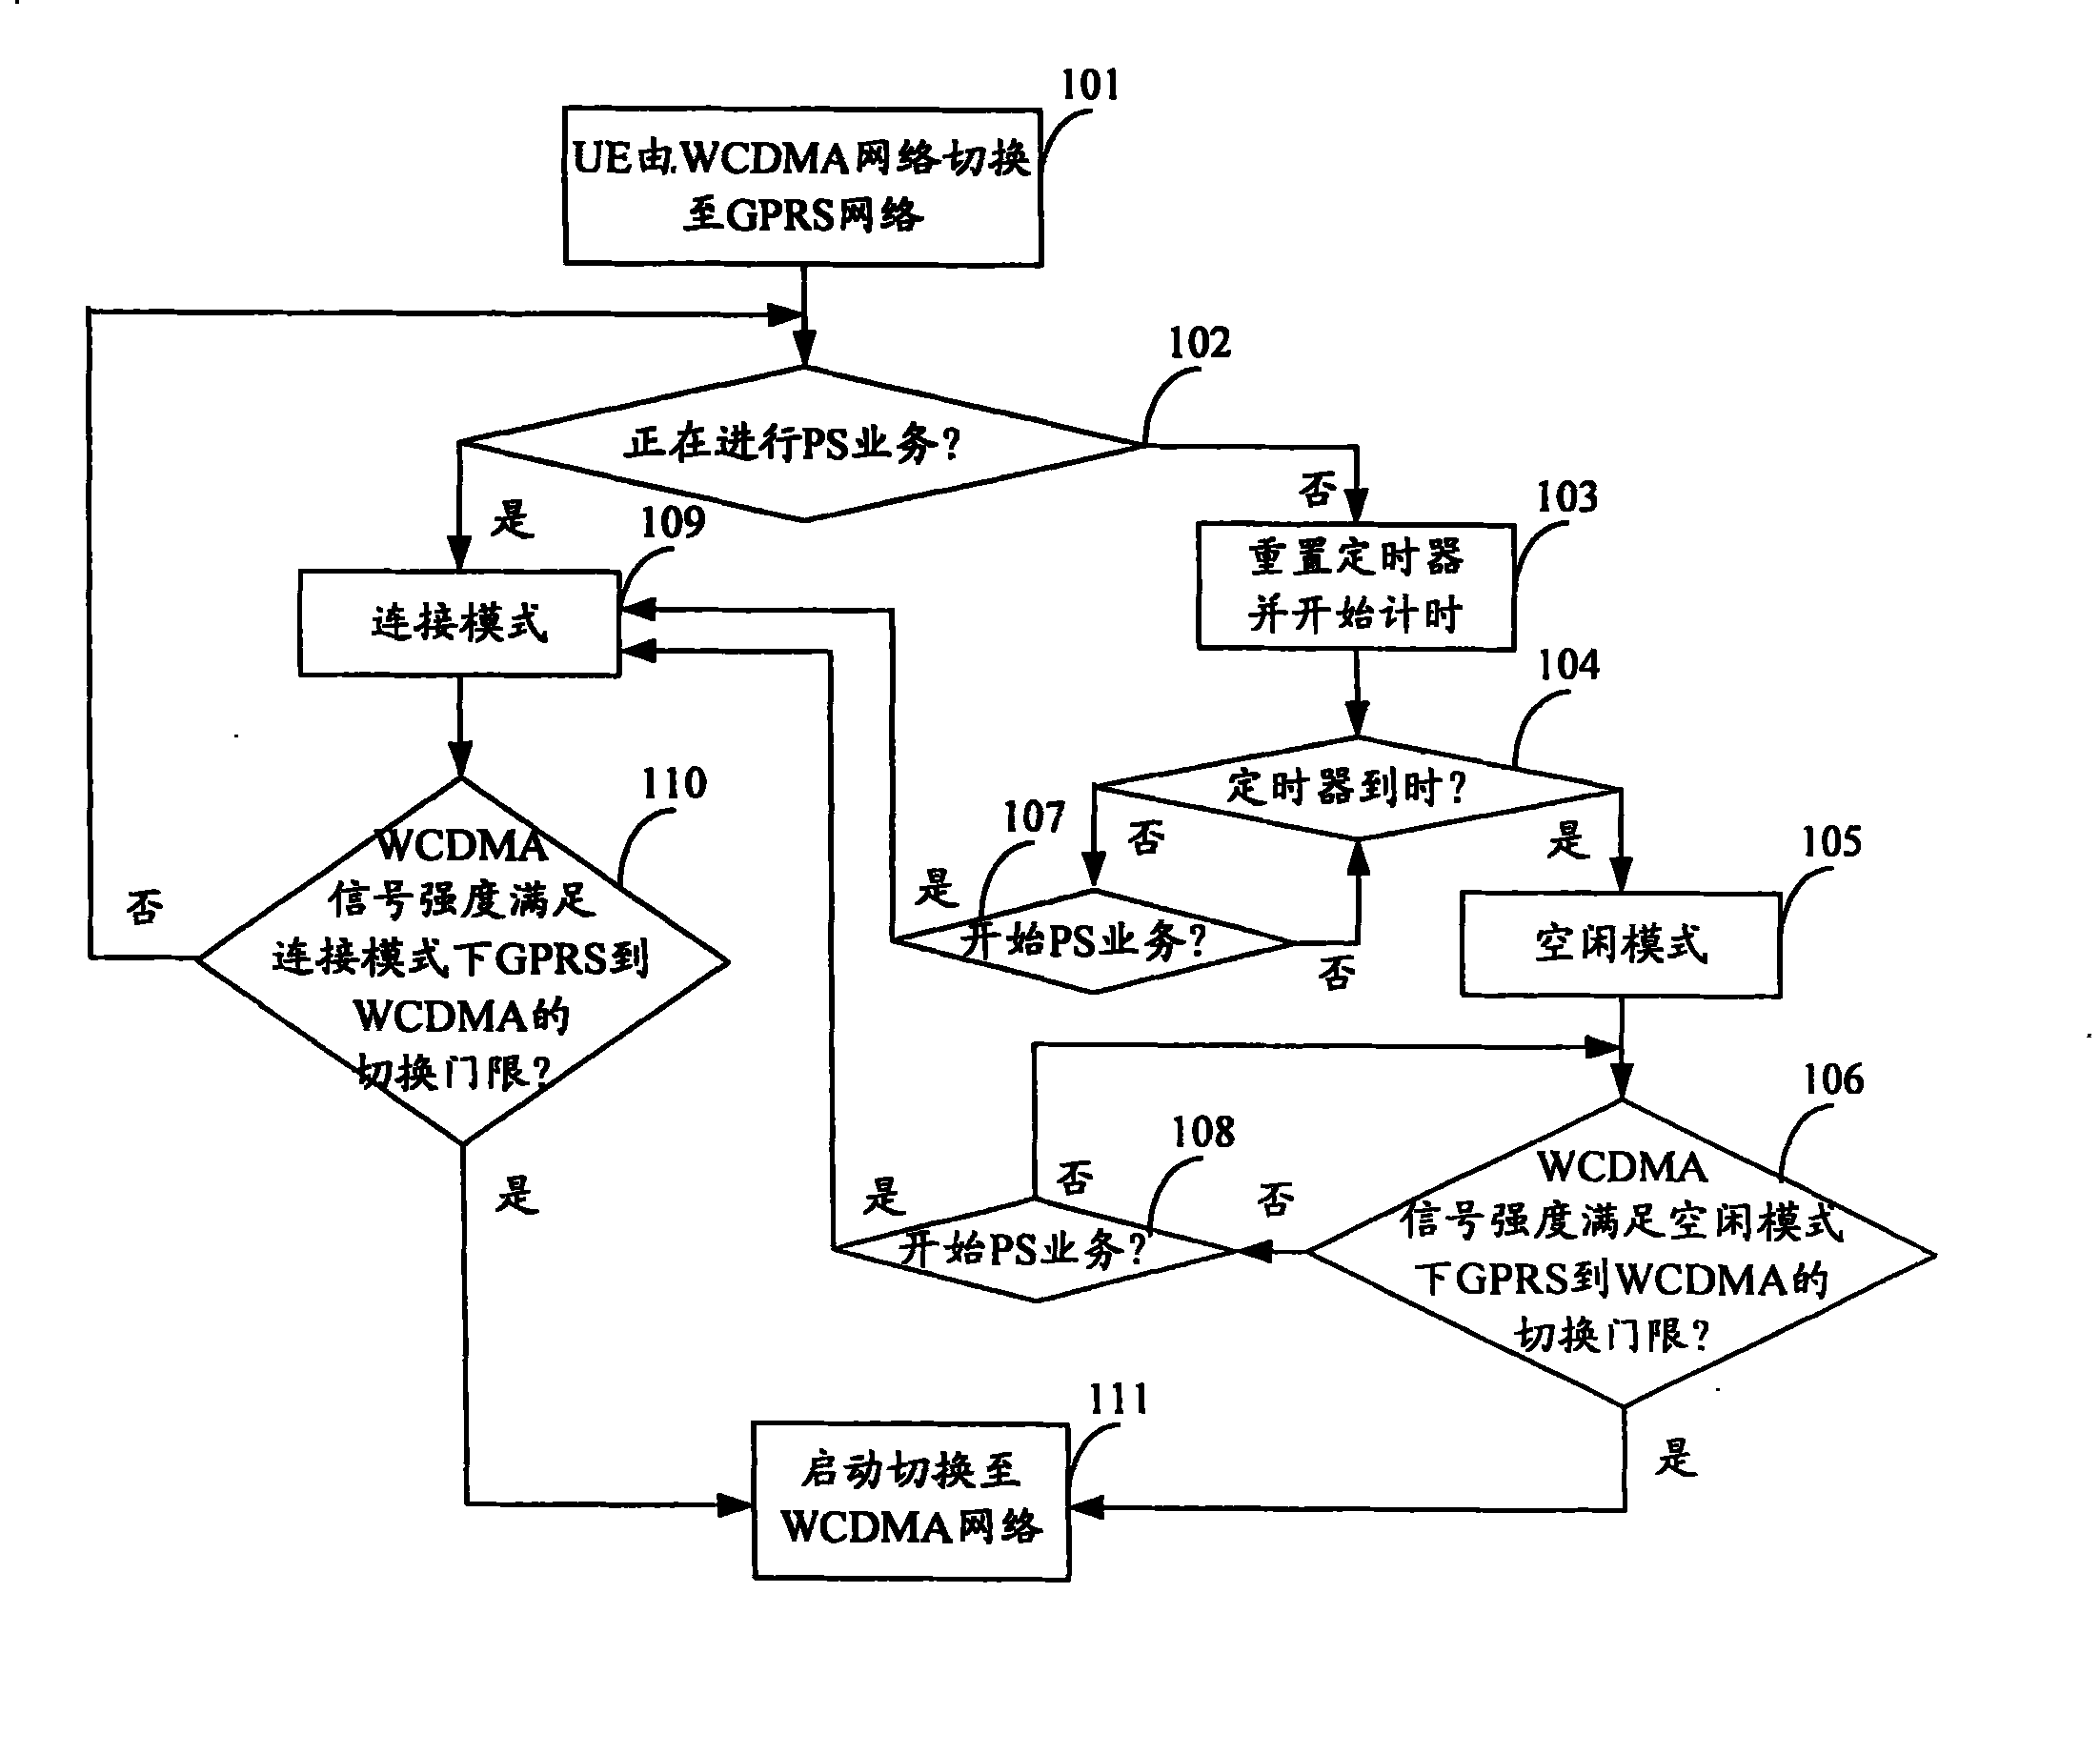 Control method for mobile communication network switching